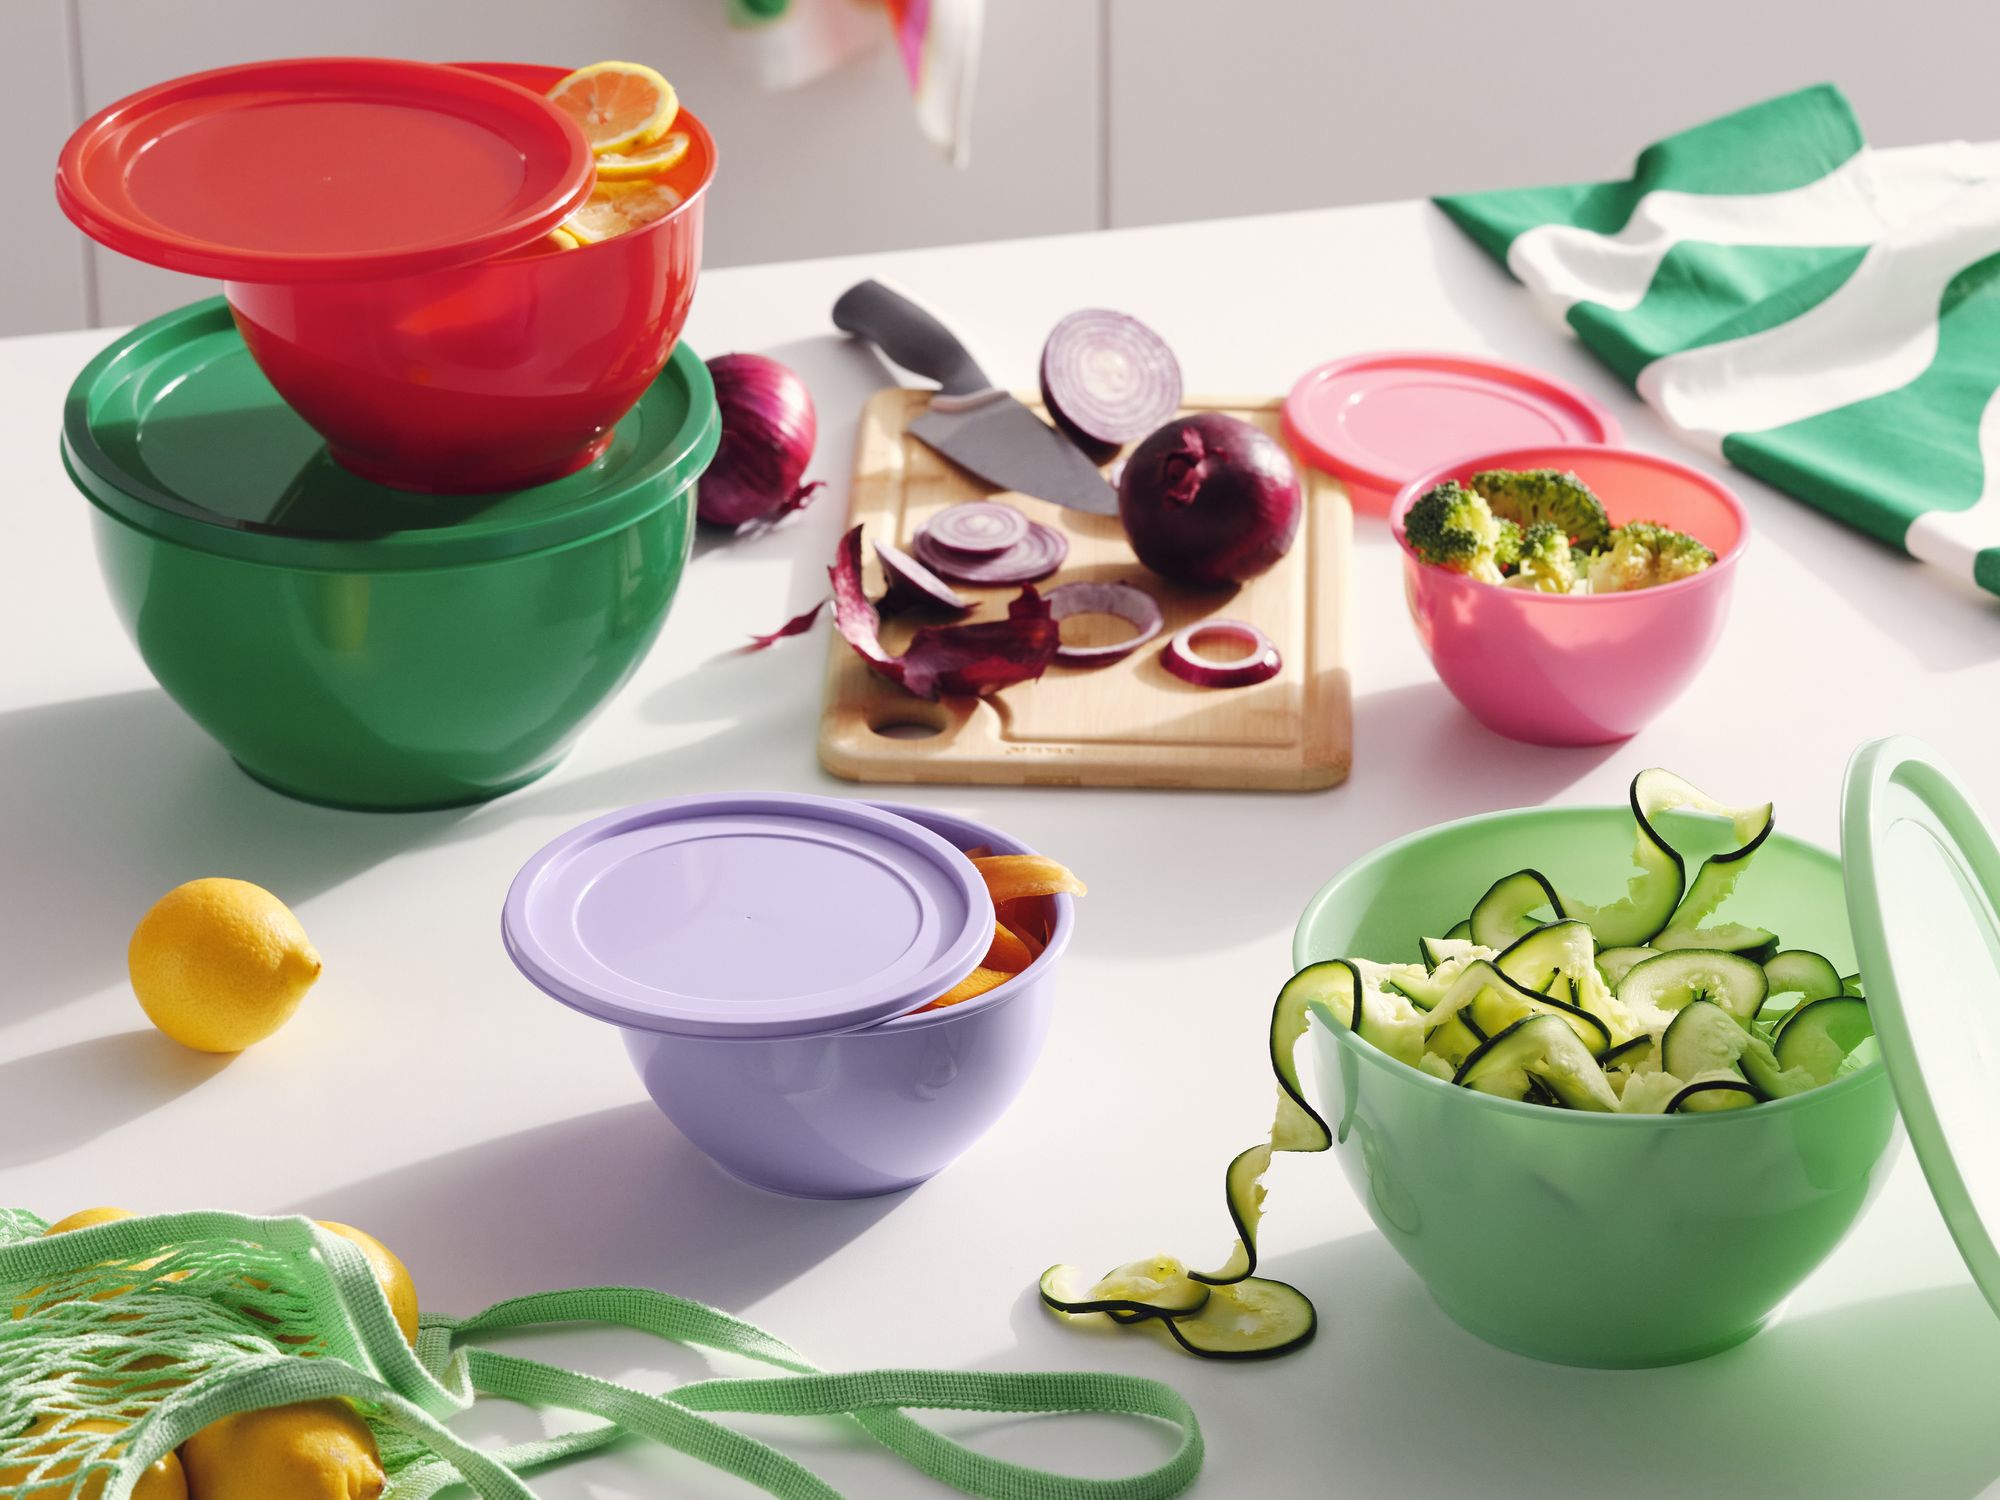 https://www.brit.co/media-library/ikea-food-storage-solutions-with-the-new-line-tabberas.jpg?id=35080281&width=2000&height=1500&coordinates=0%2C714%2C0%2C715